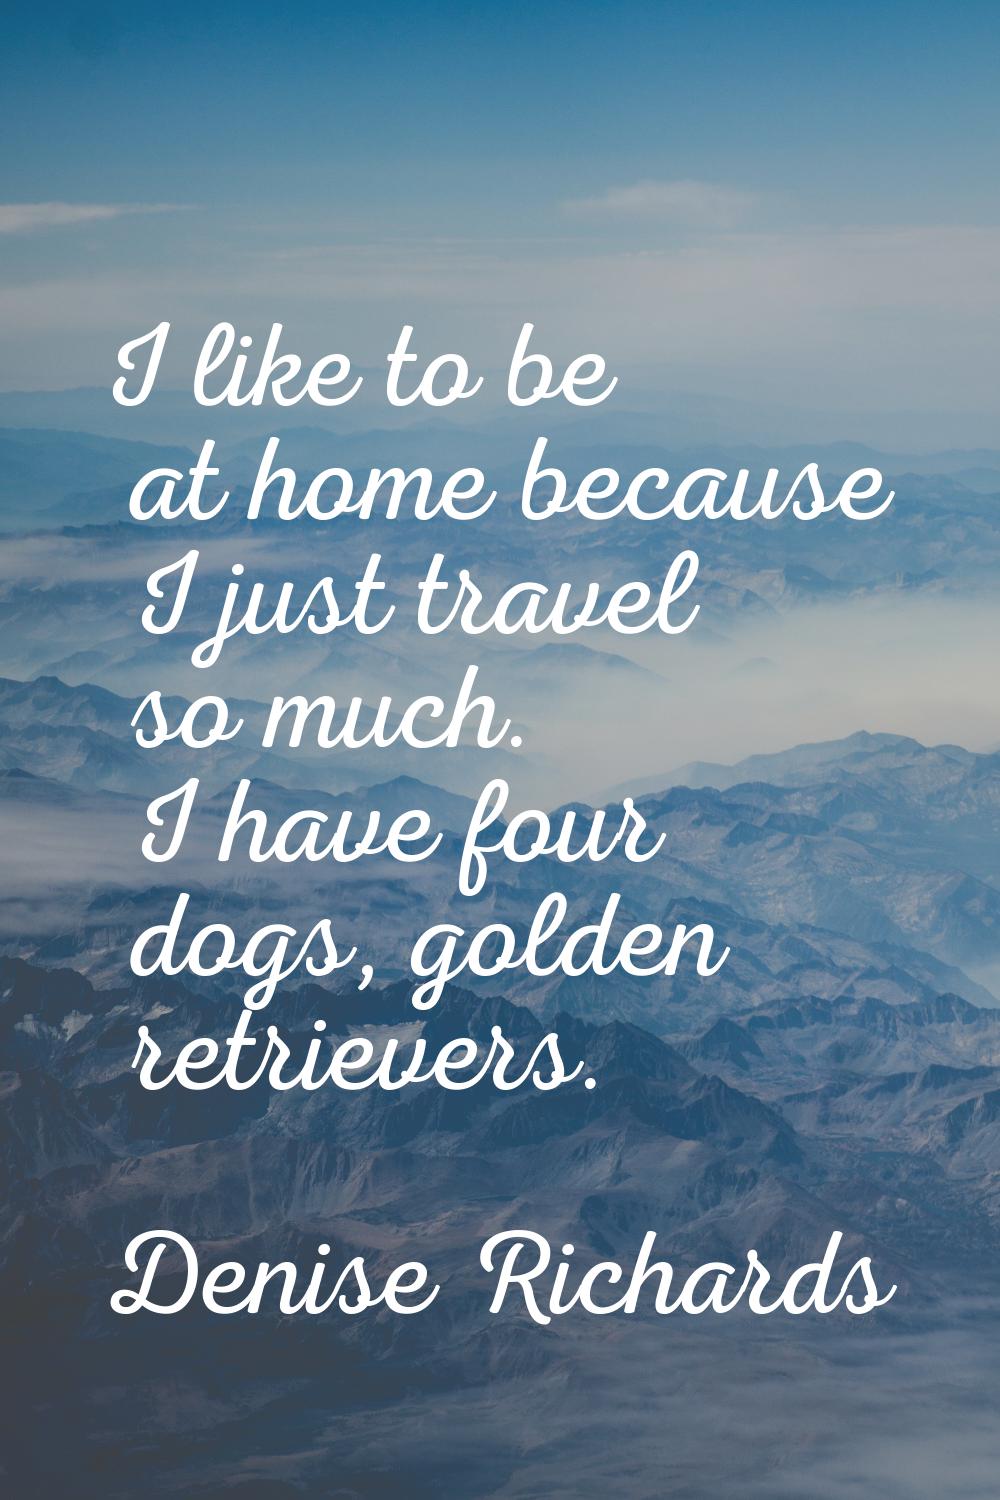 I like to be at home because I just travel so much. I have four dogs, golden retrievers.